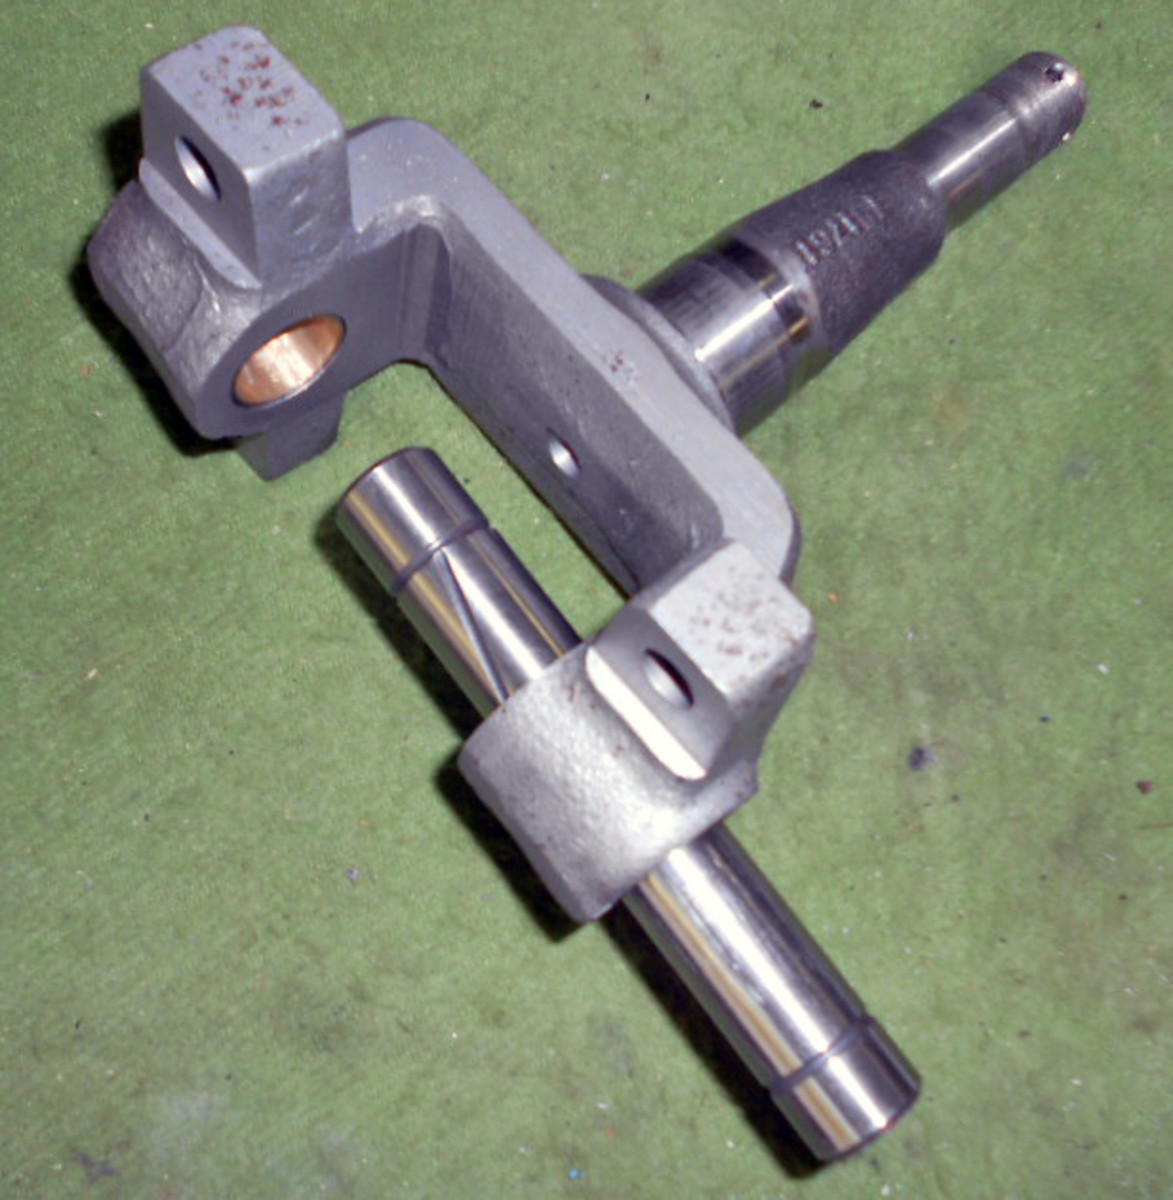 Figure 3: The axle has had new bushings installed and reamed to provide the proper fit with the king pin.